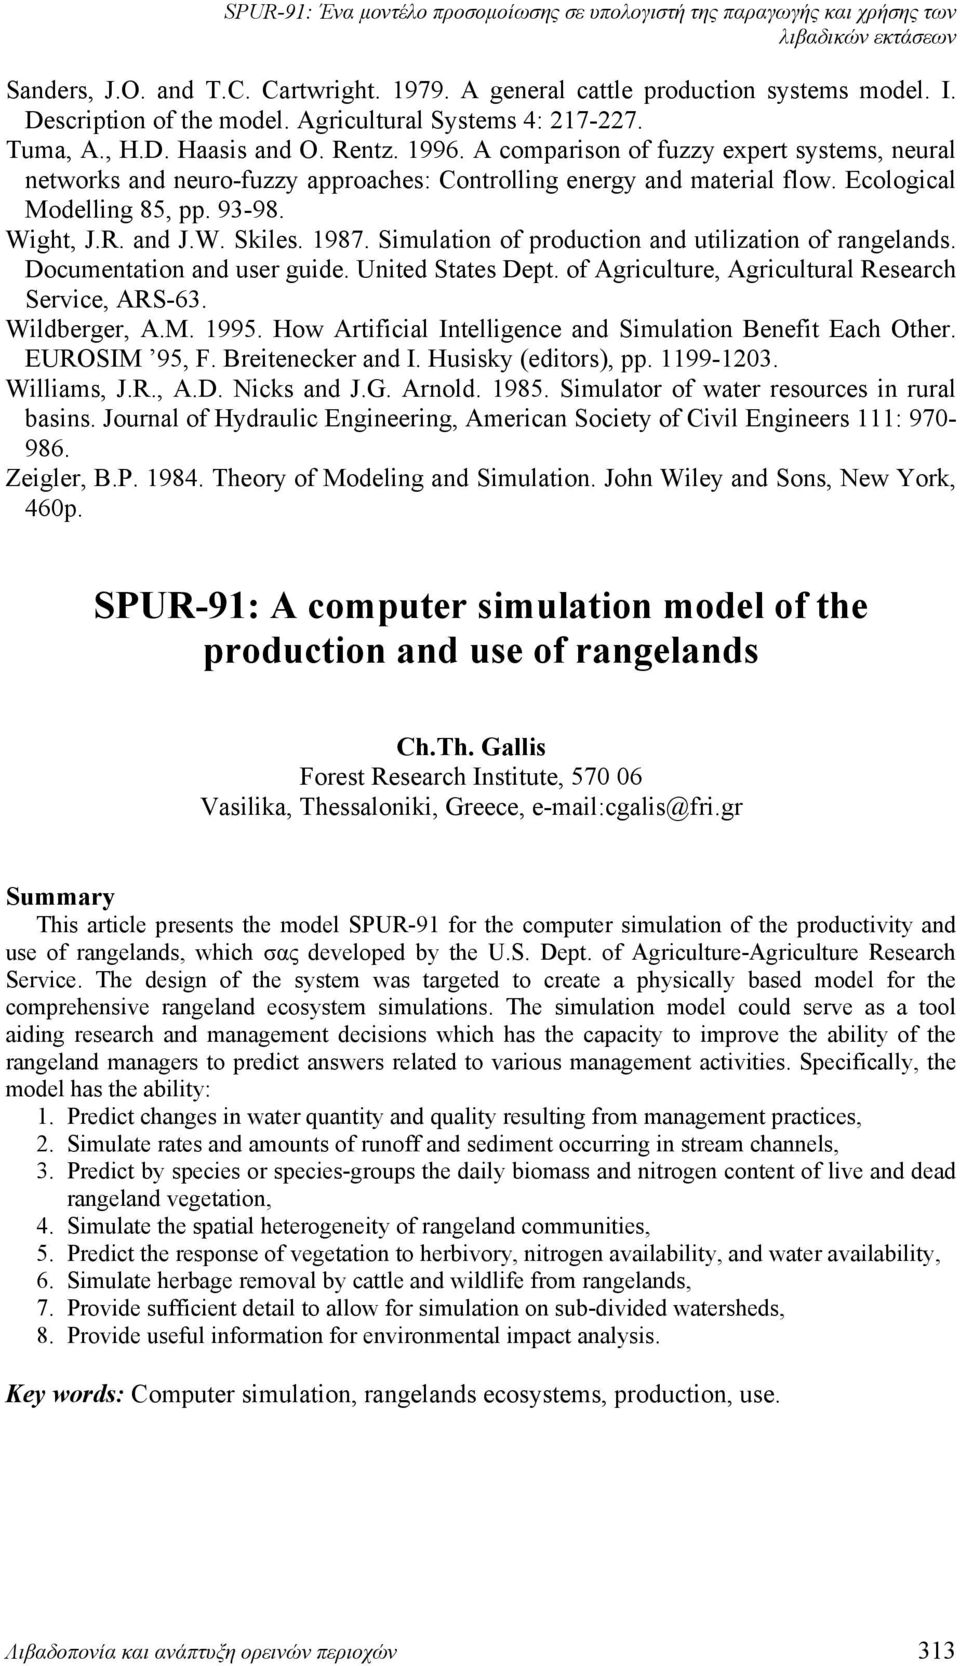 Simulation of production and utilization of rangelands. Documentation and user guide. United States Dept. of Agriculture, Agricultural Research Service, ARS-63. Wildberger, A.M. 1995.